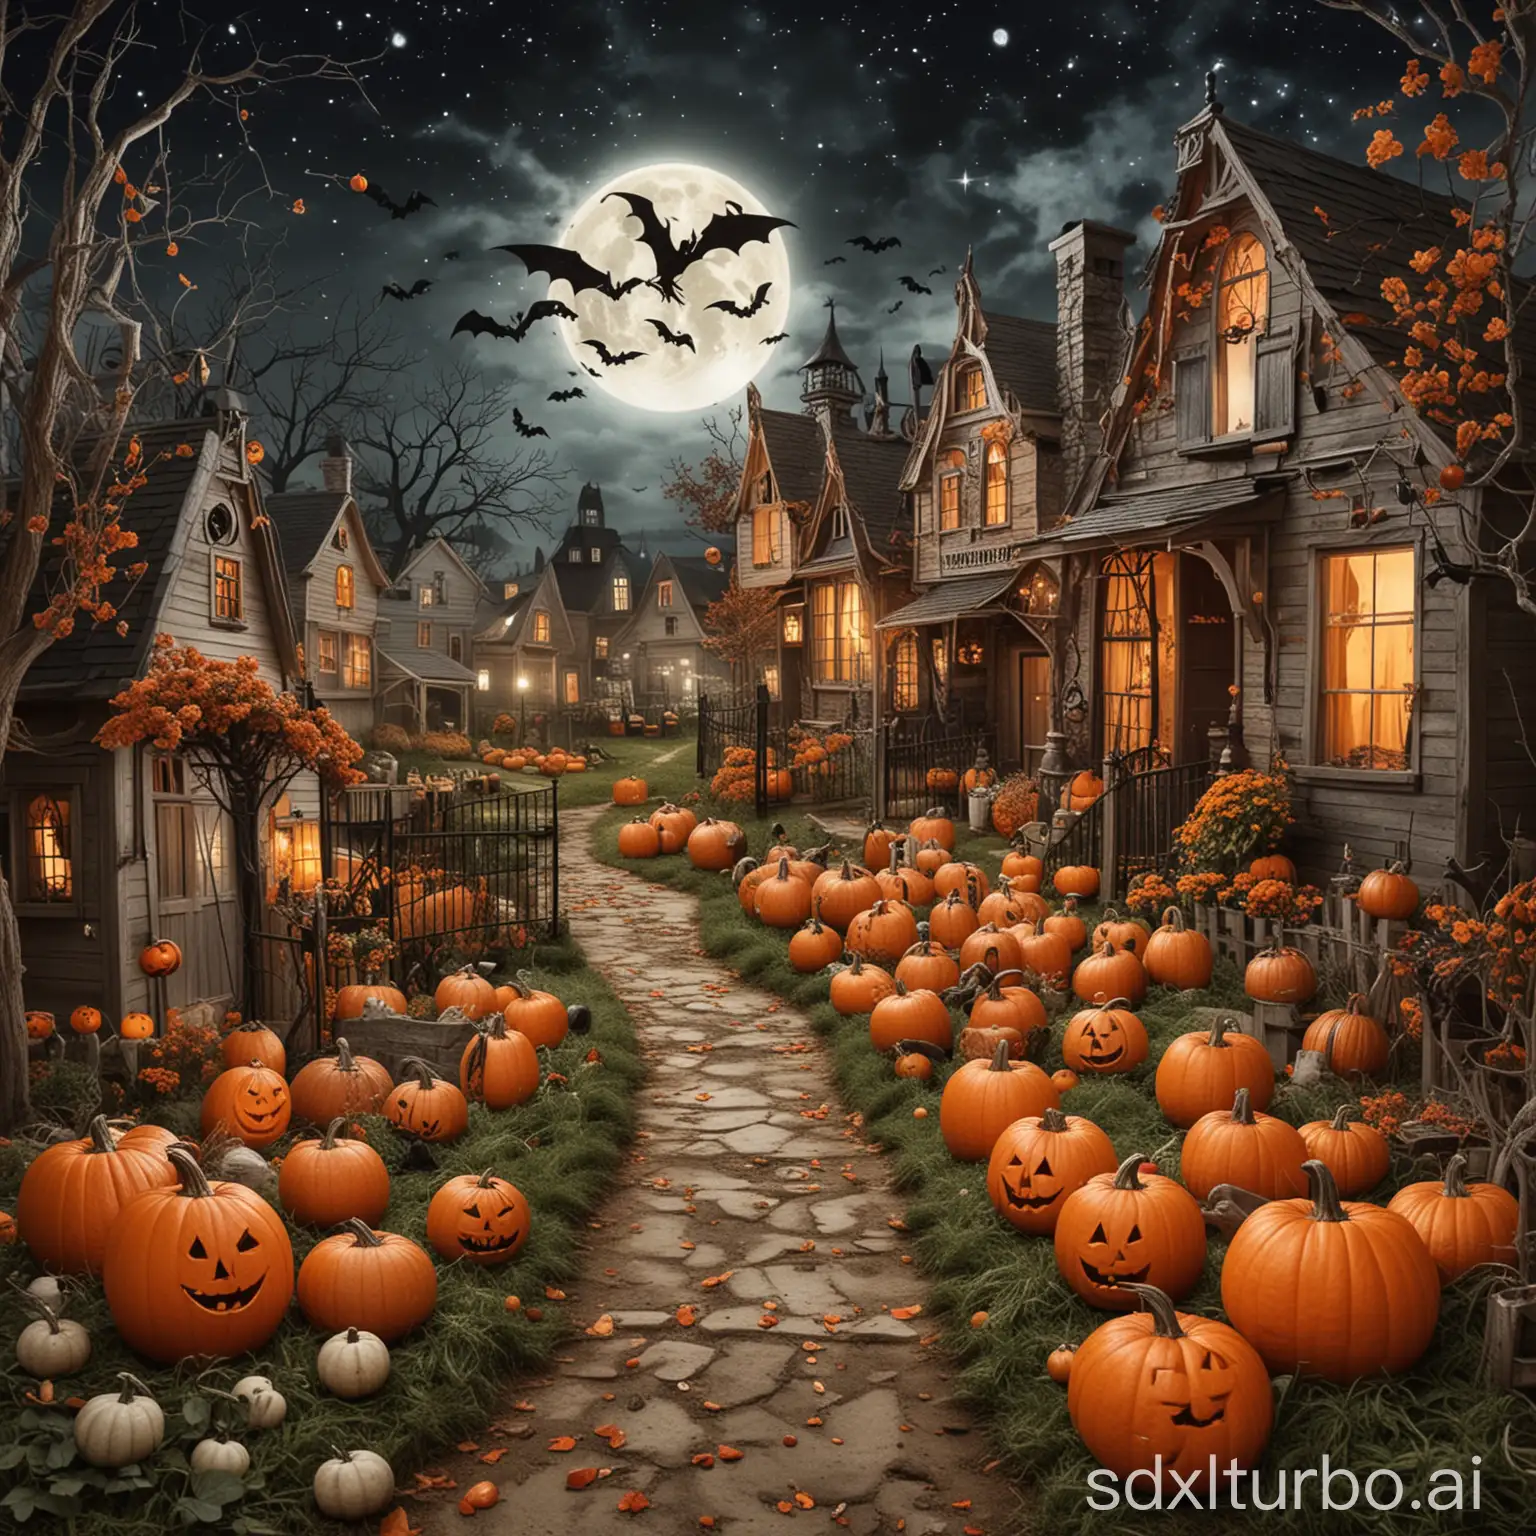 Blend Halloween with another theme: Combine Halloween elements with a different theme, such as a space-themed pumpkin patch or a superhero ghost